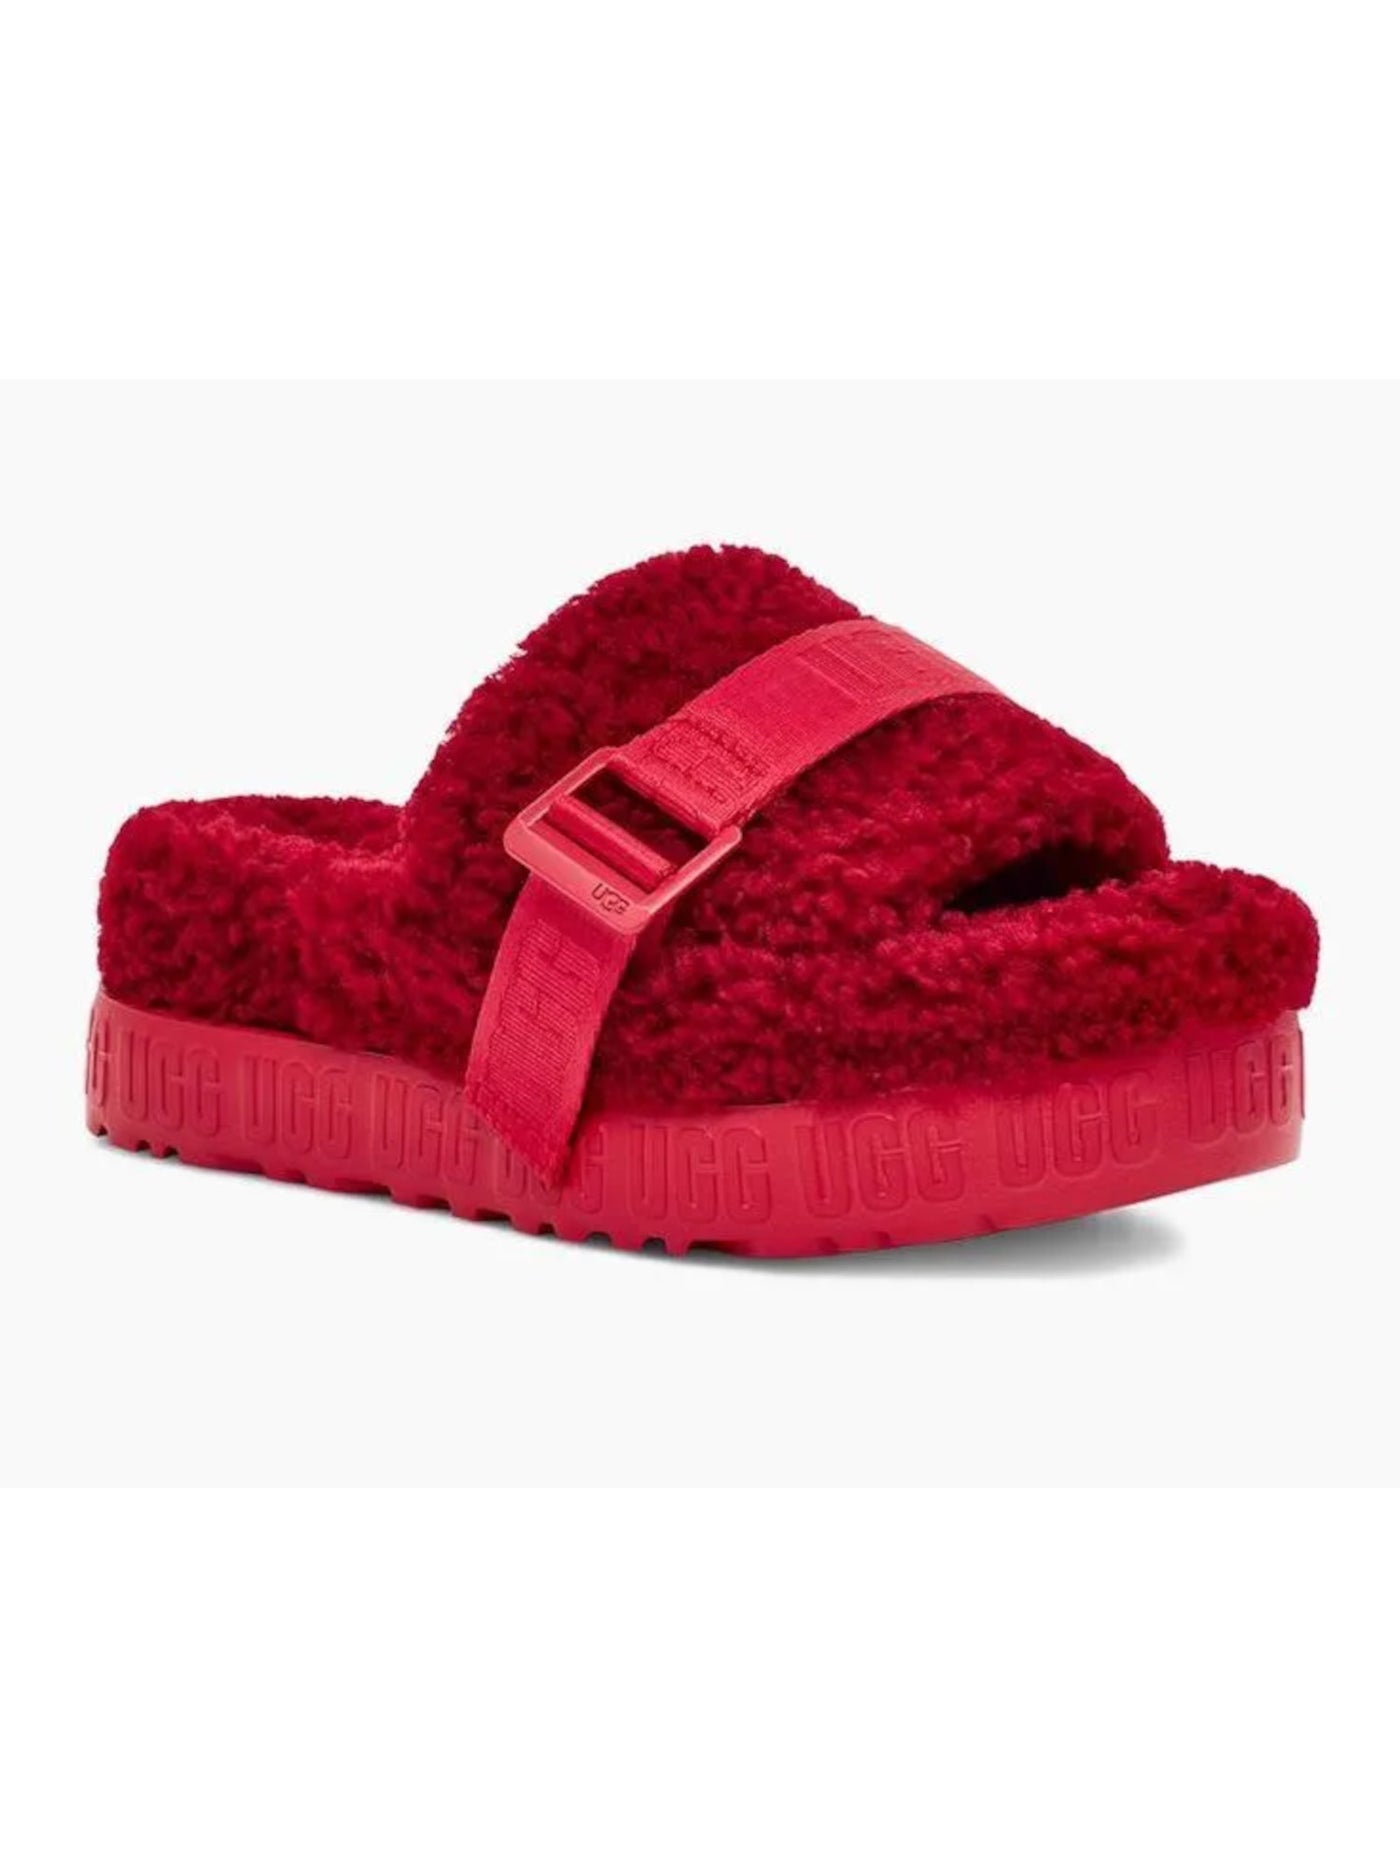 UGG Womens Red Buckled Vamp Strap Fluffita Round Toe Slip On Leather Slippers Shoes 9